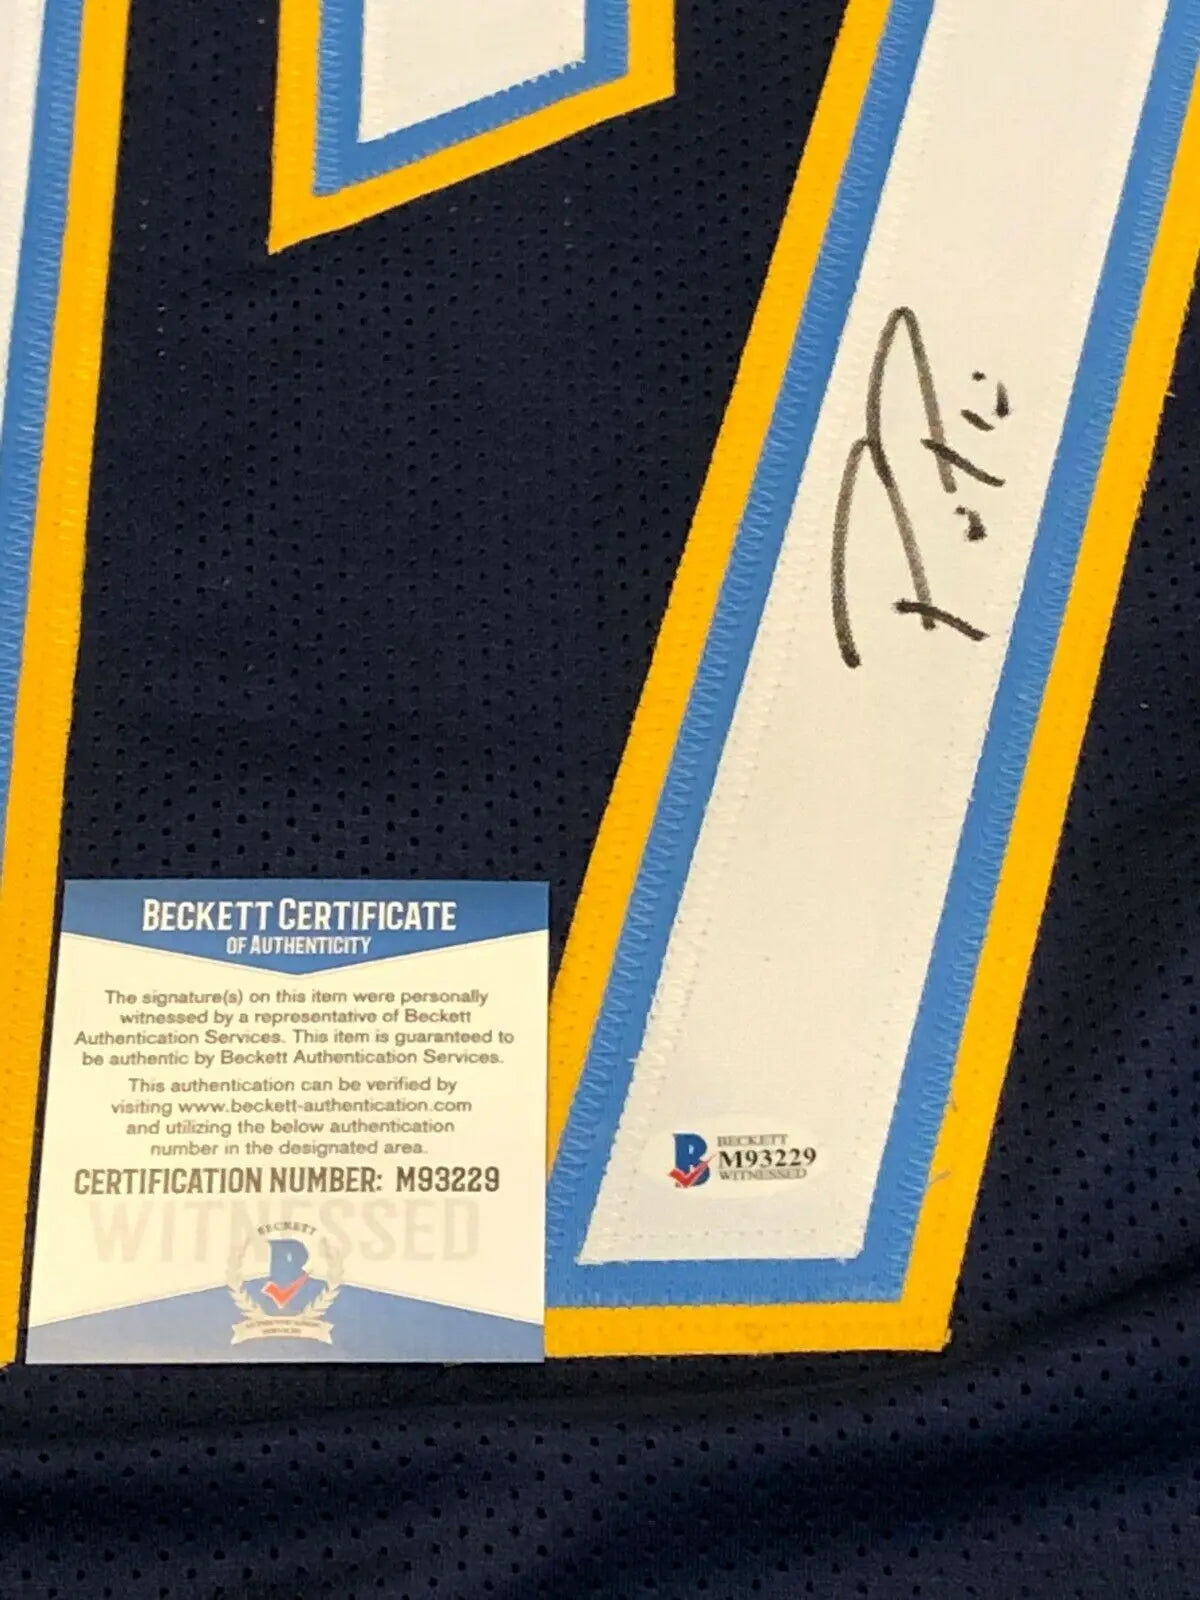 philip rivers authentic jersey